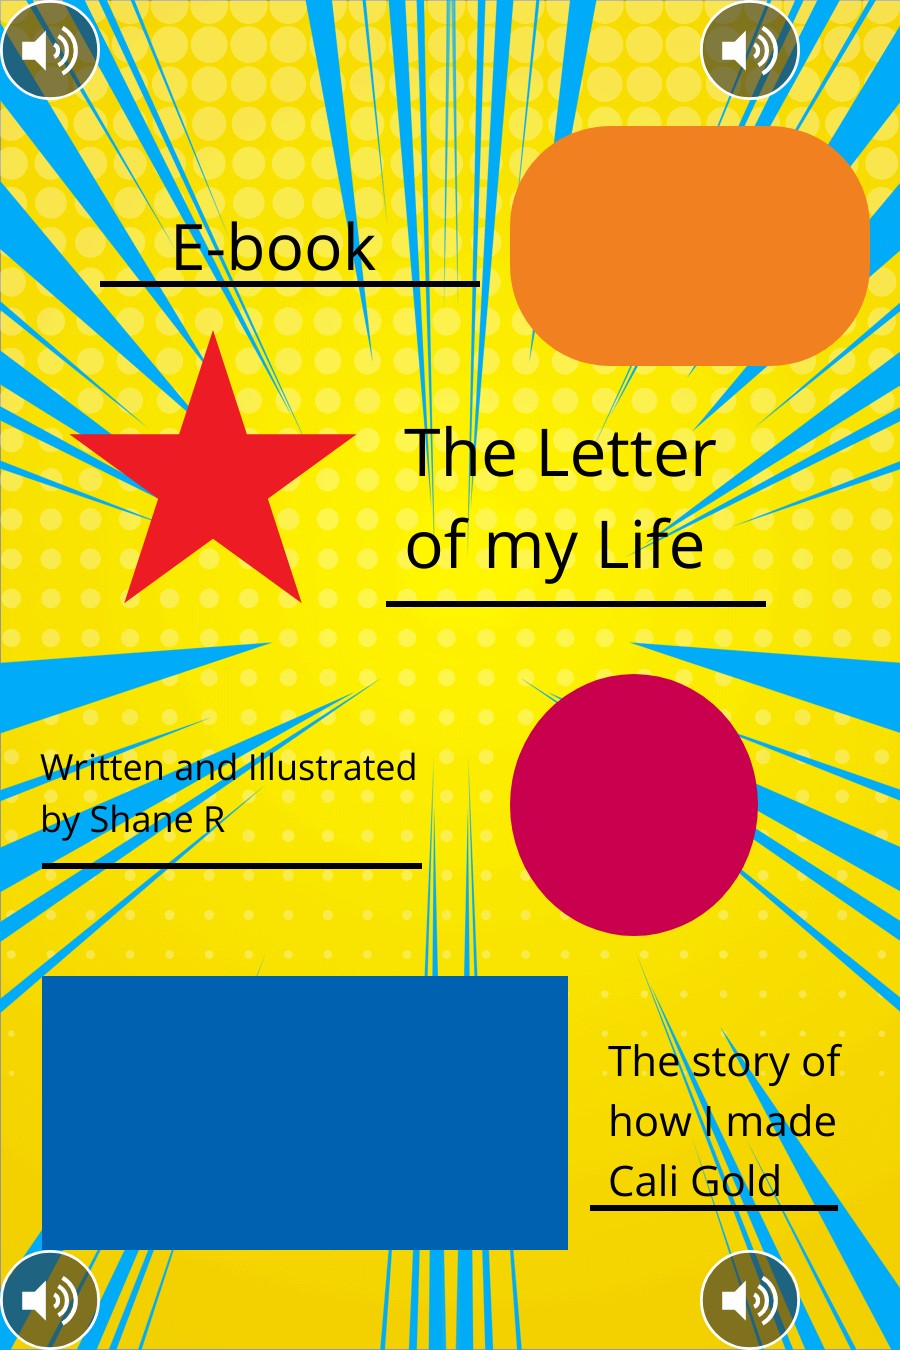 The Letter of My Life by Shane R